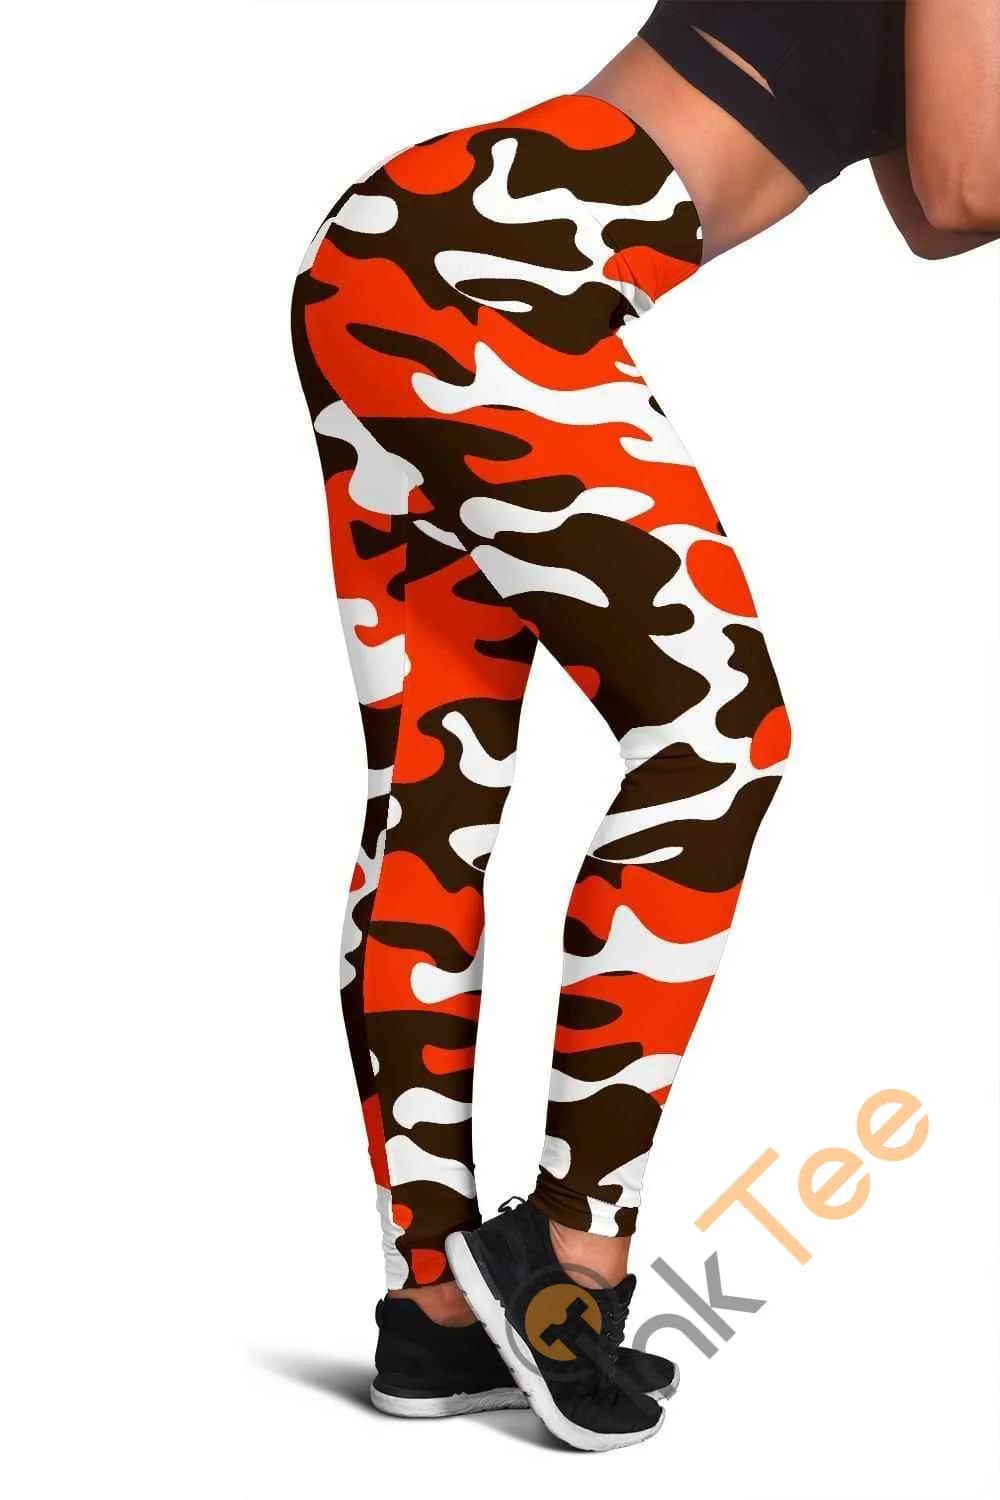 Cleveland Browns Inspired Tru Camo 3D All Over Print For Yoga Fitness Fashion Women's Leggings